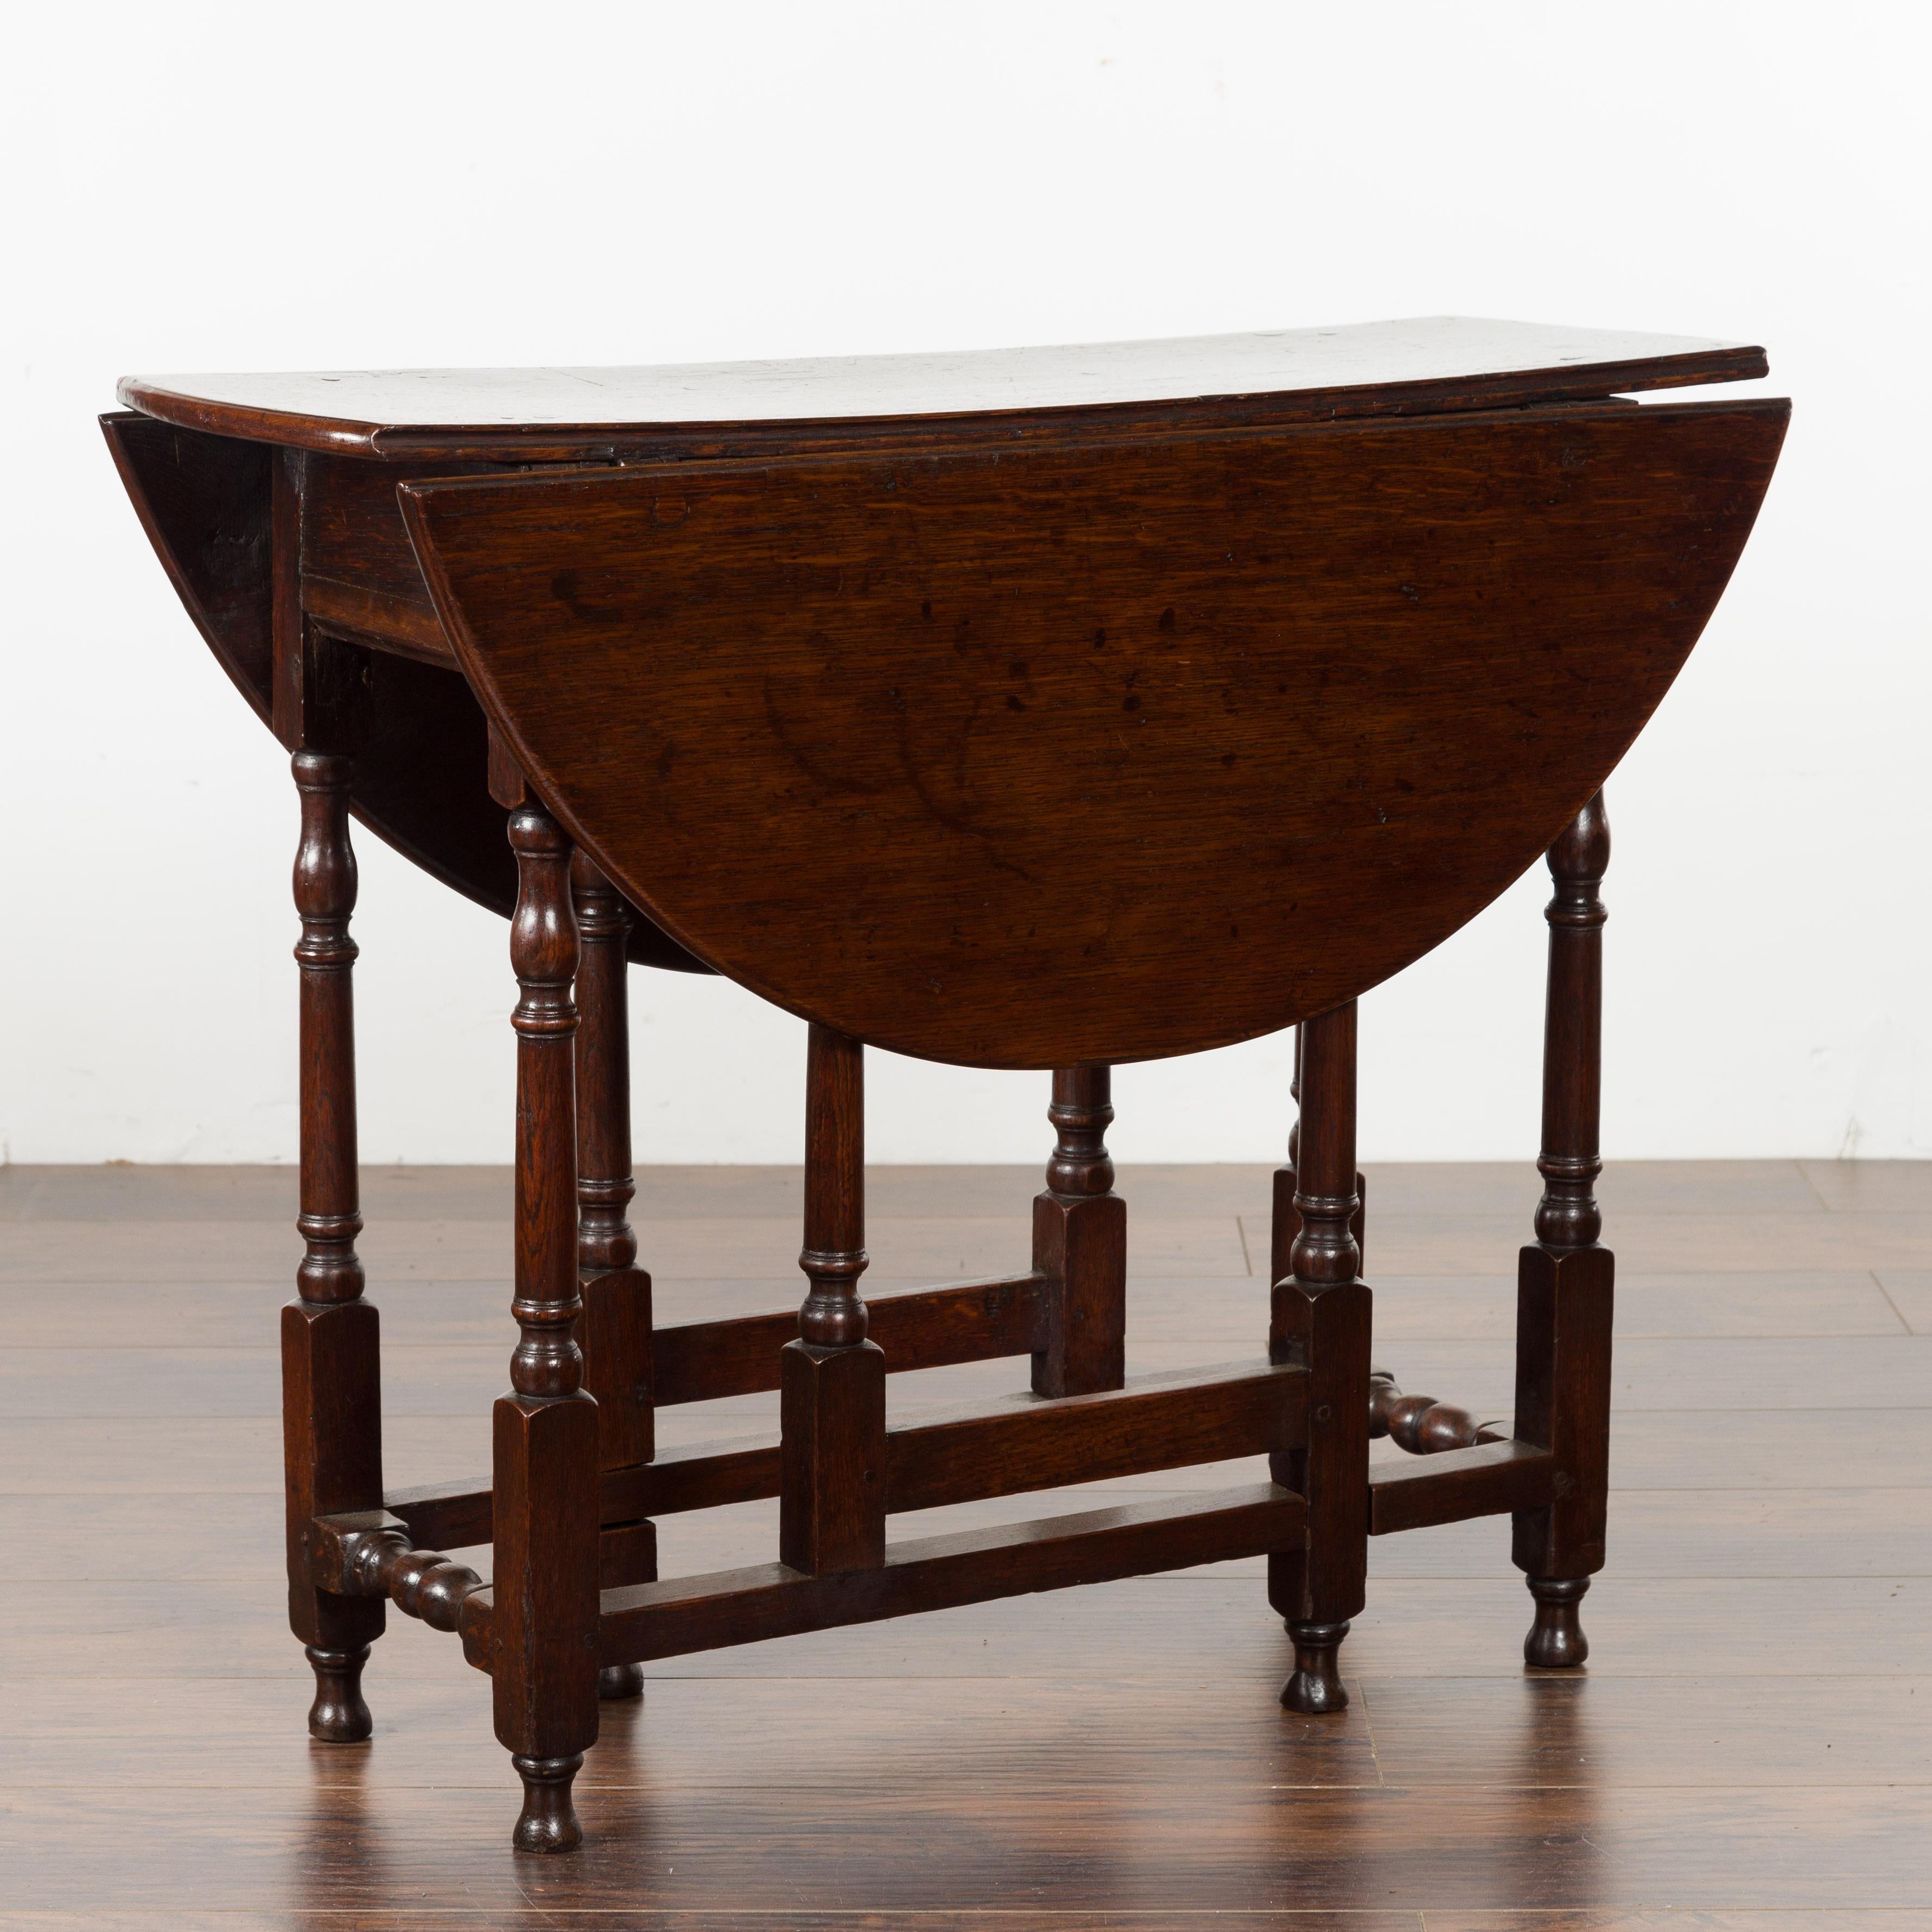 Petite English Oval Oak 19th Century Drop-Leaf Table with Baluster Legs For Sale 2